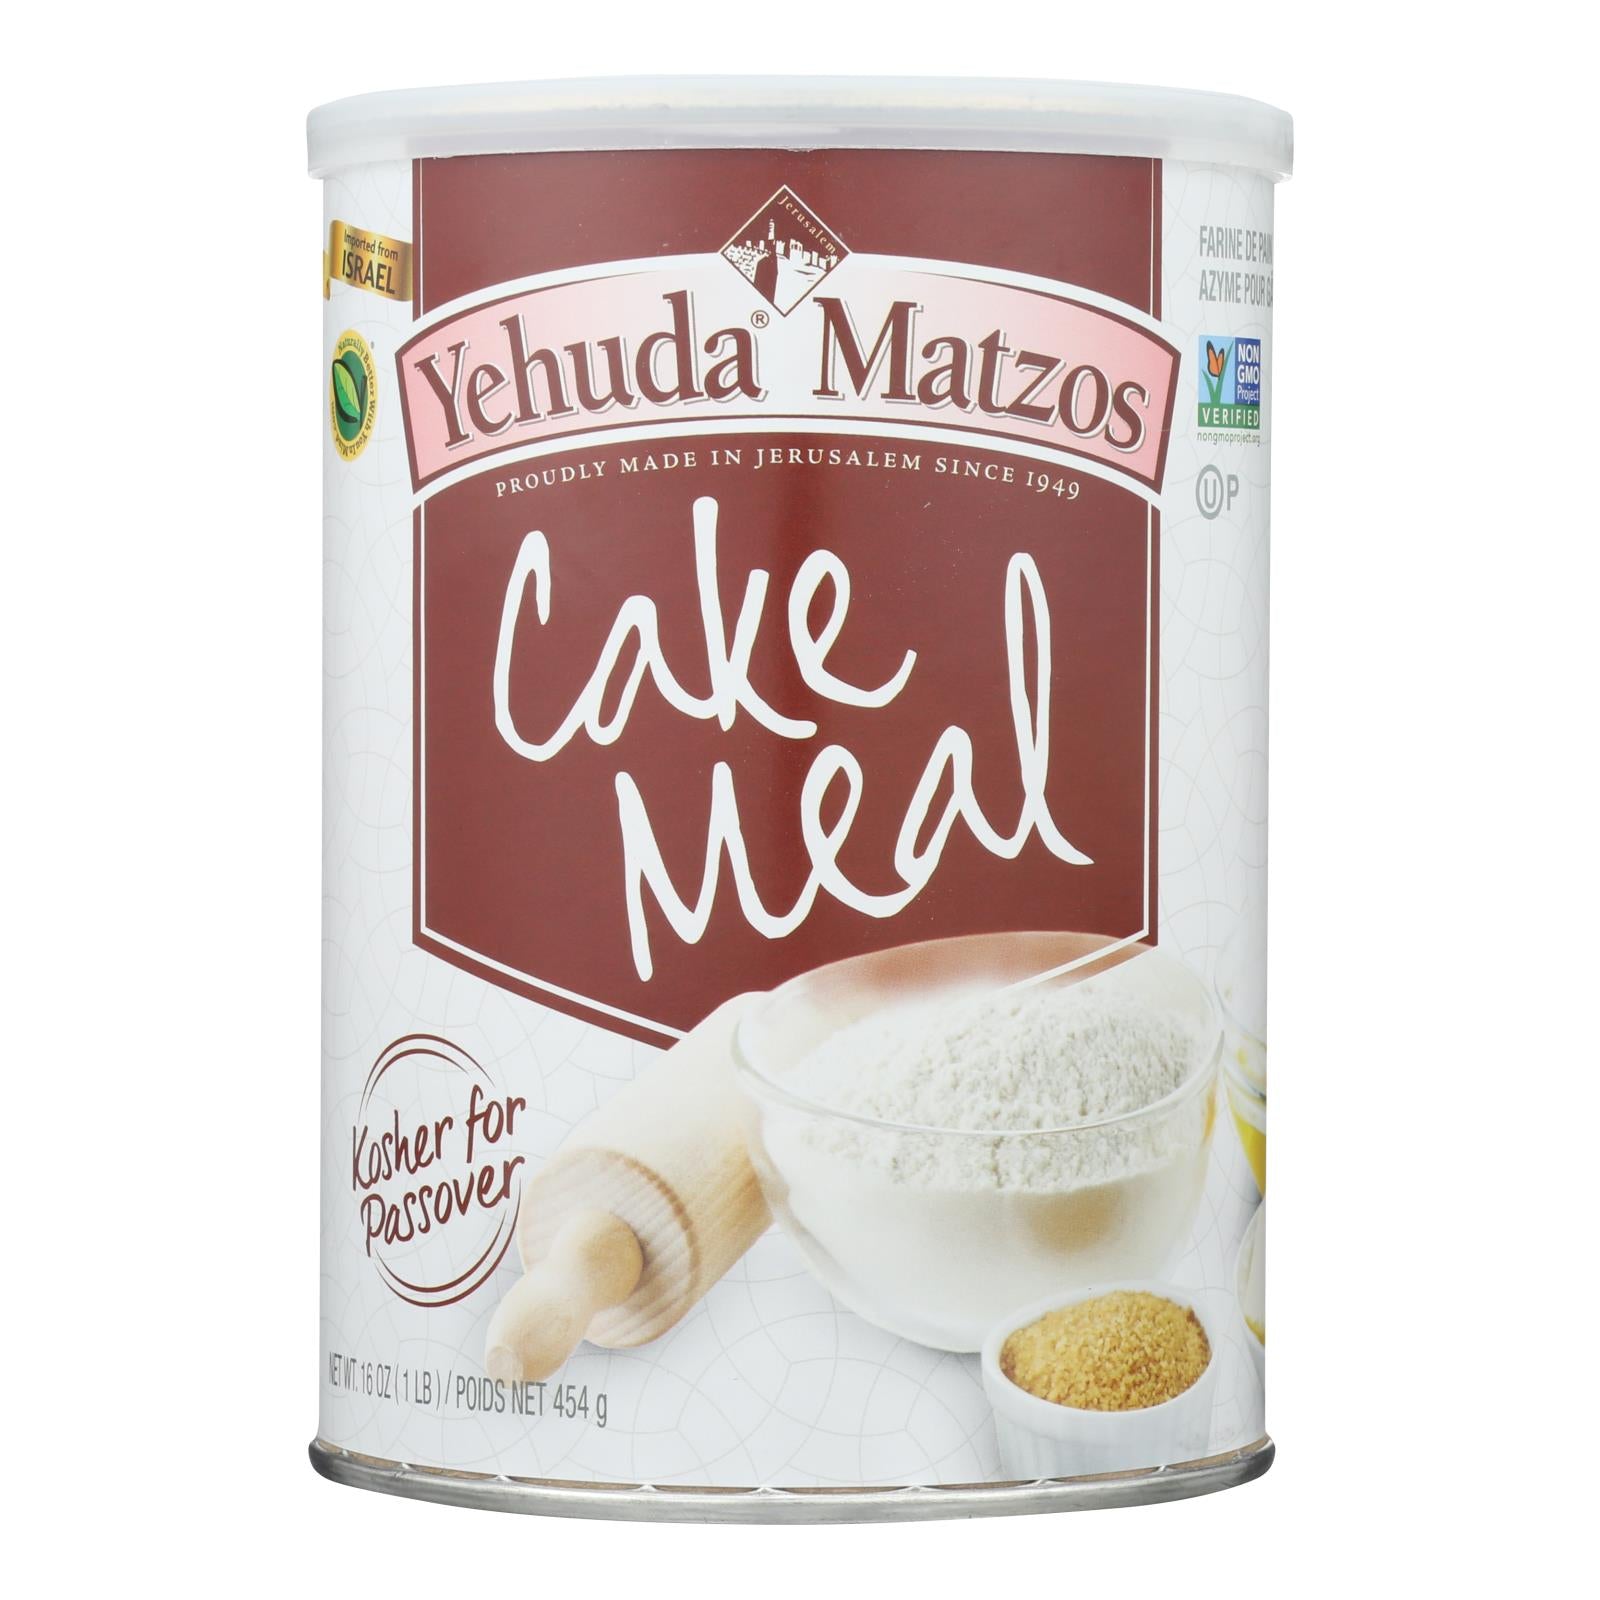 Yehuda - Cake Meal Canister Kosher for Passover - Case of 12 - 16 OZ